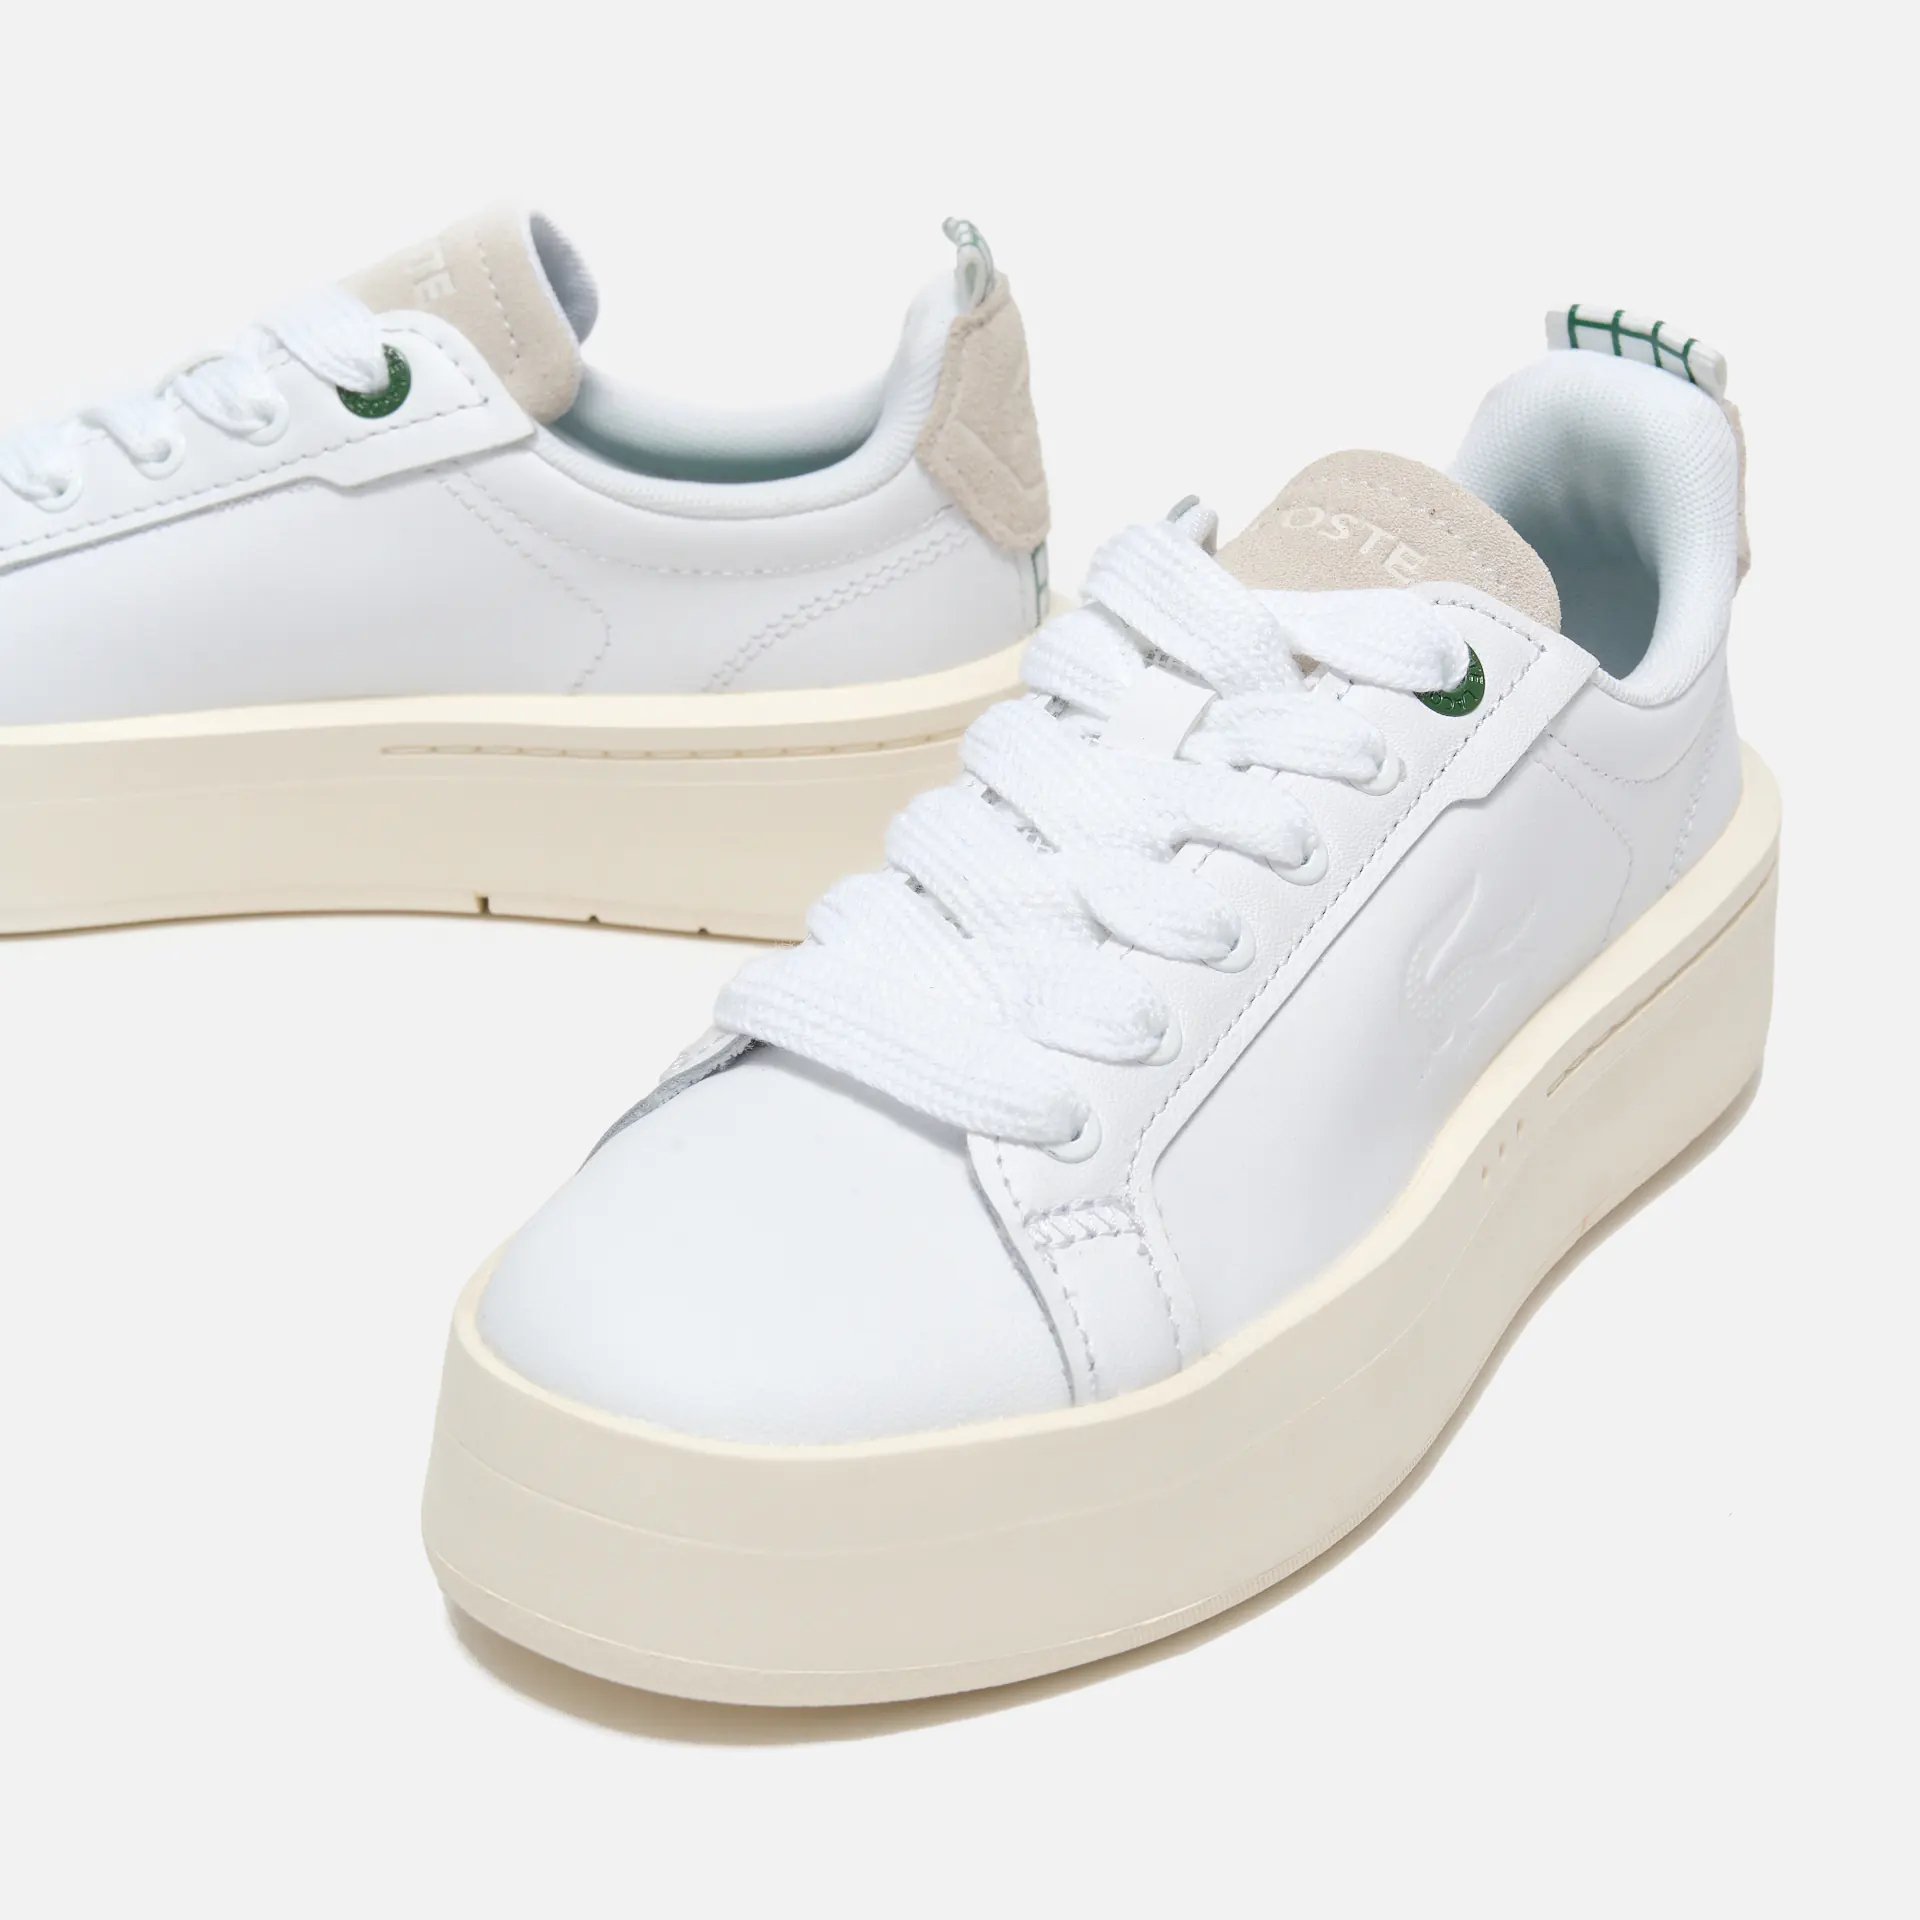 Lacoste Carnaby 123 Plateau Sneaker White/Off-White